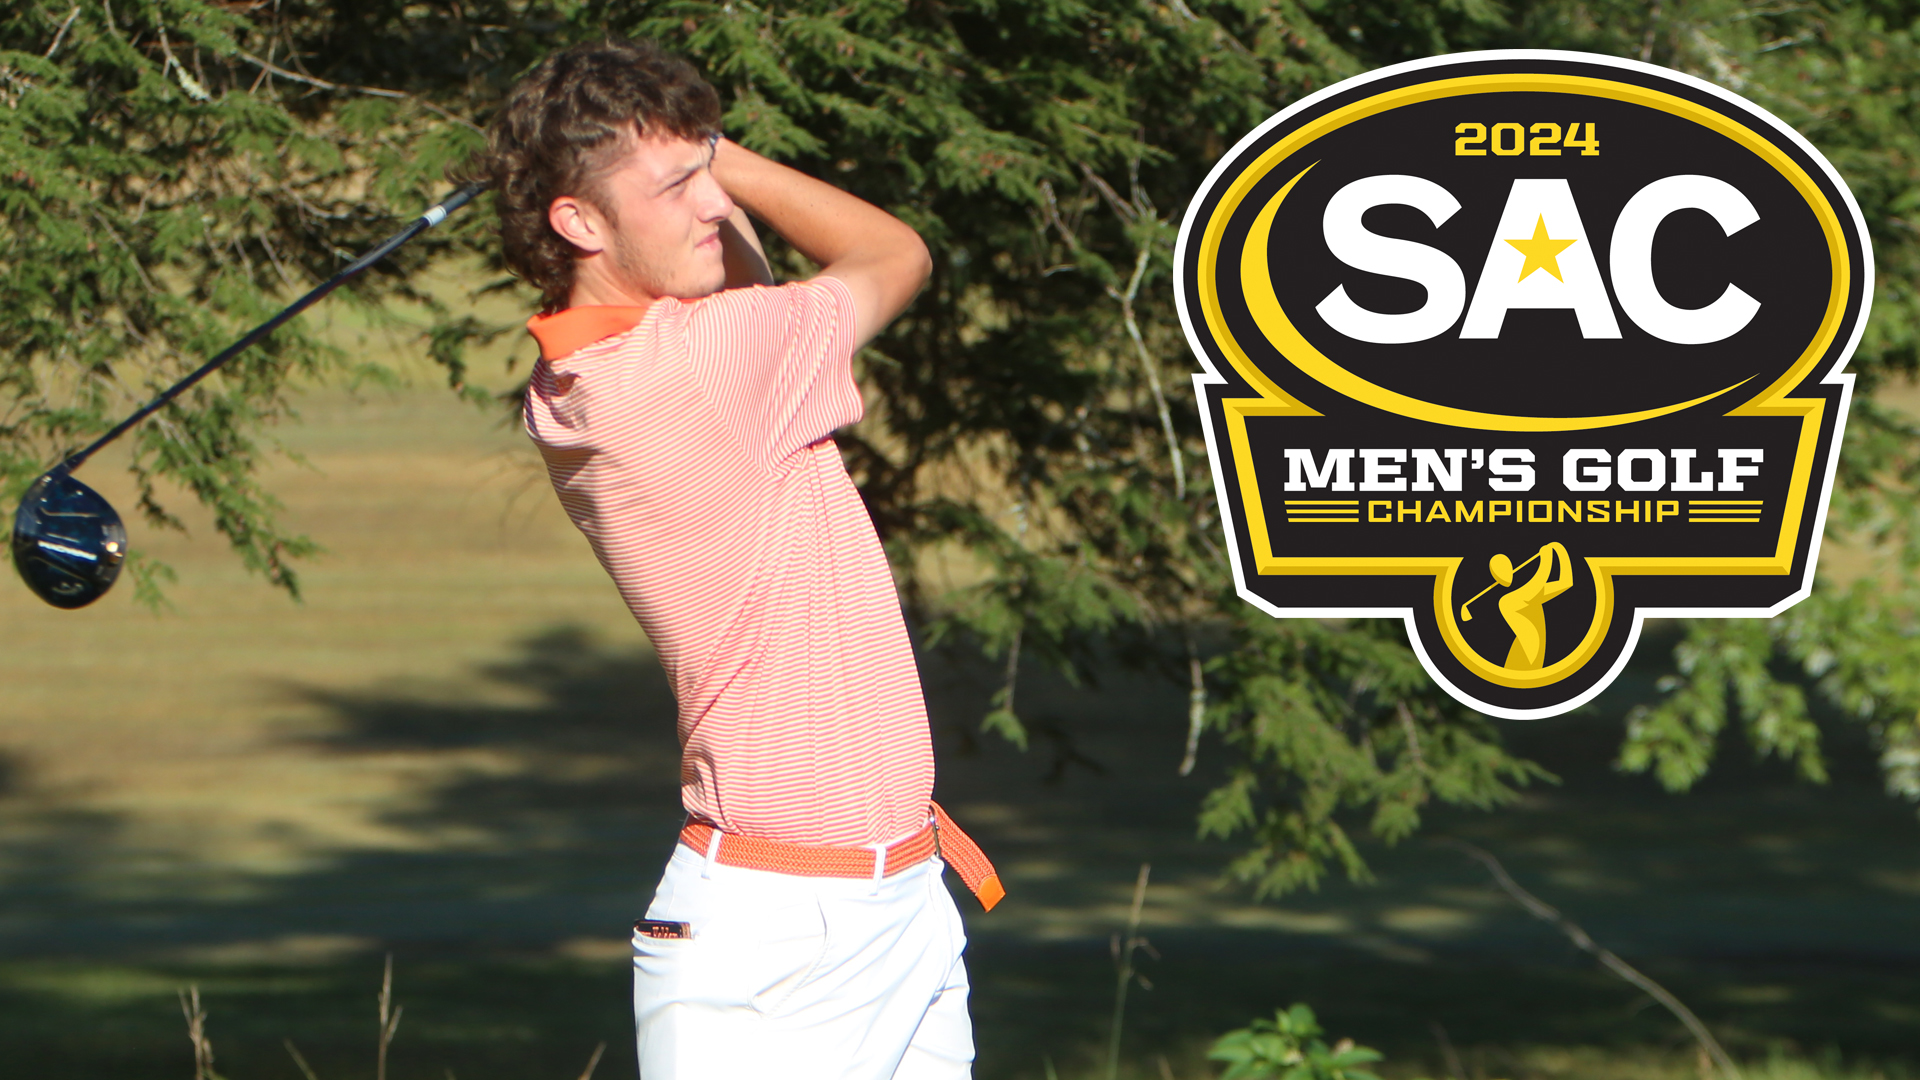 Men's Golf tied for ninth after day one of SAC Championship